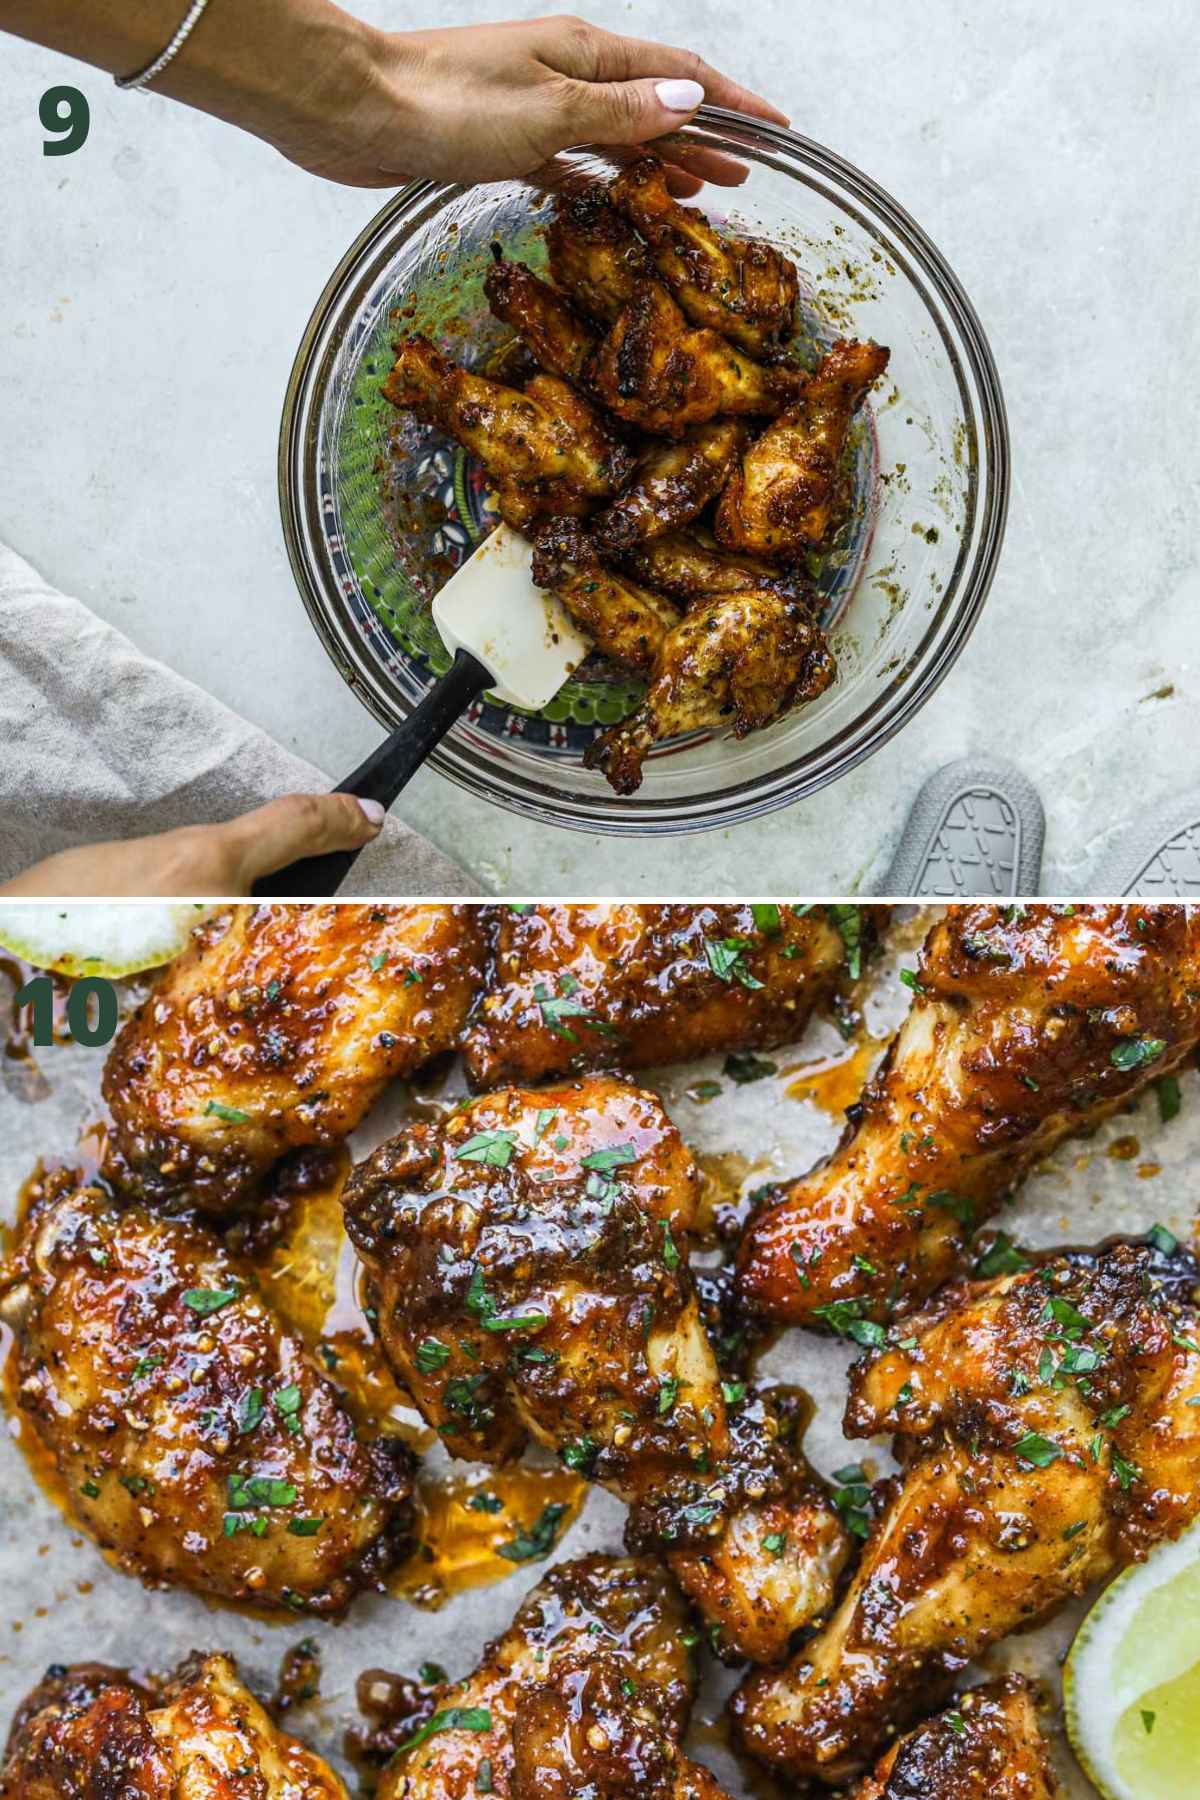 Steps to make honey lemon pepper chicken wings, including tossing the wings in the sauce and serving with parsley.